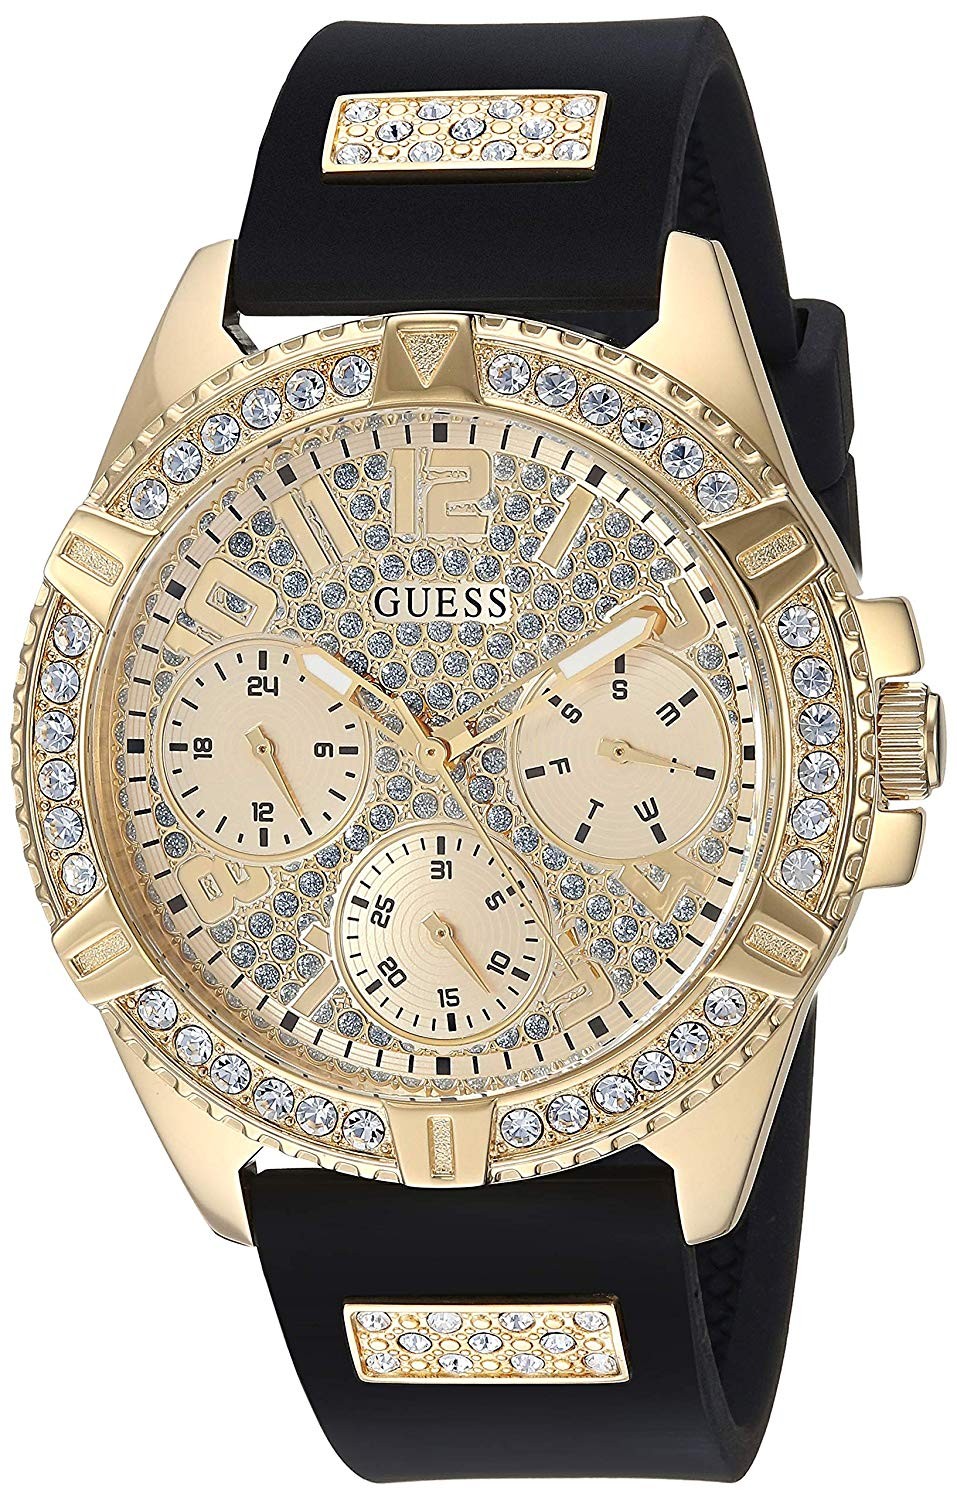 ĐỒNG HỒ GUESS DÂY SILICON UNISEX 9